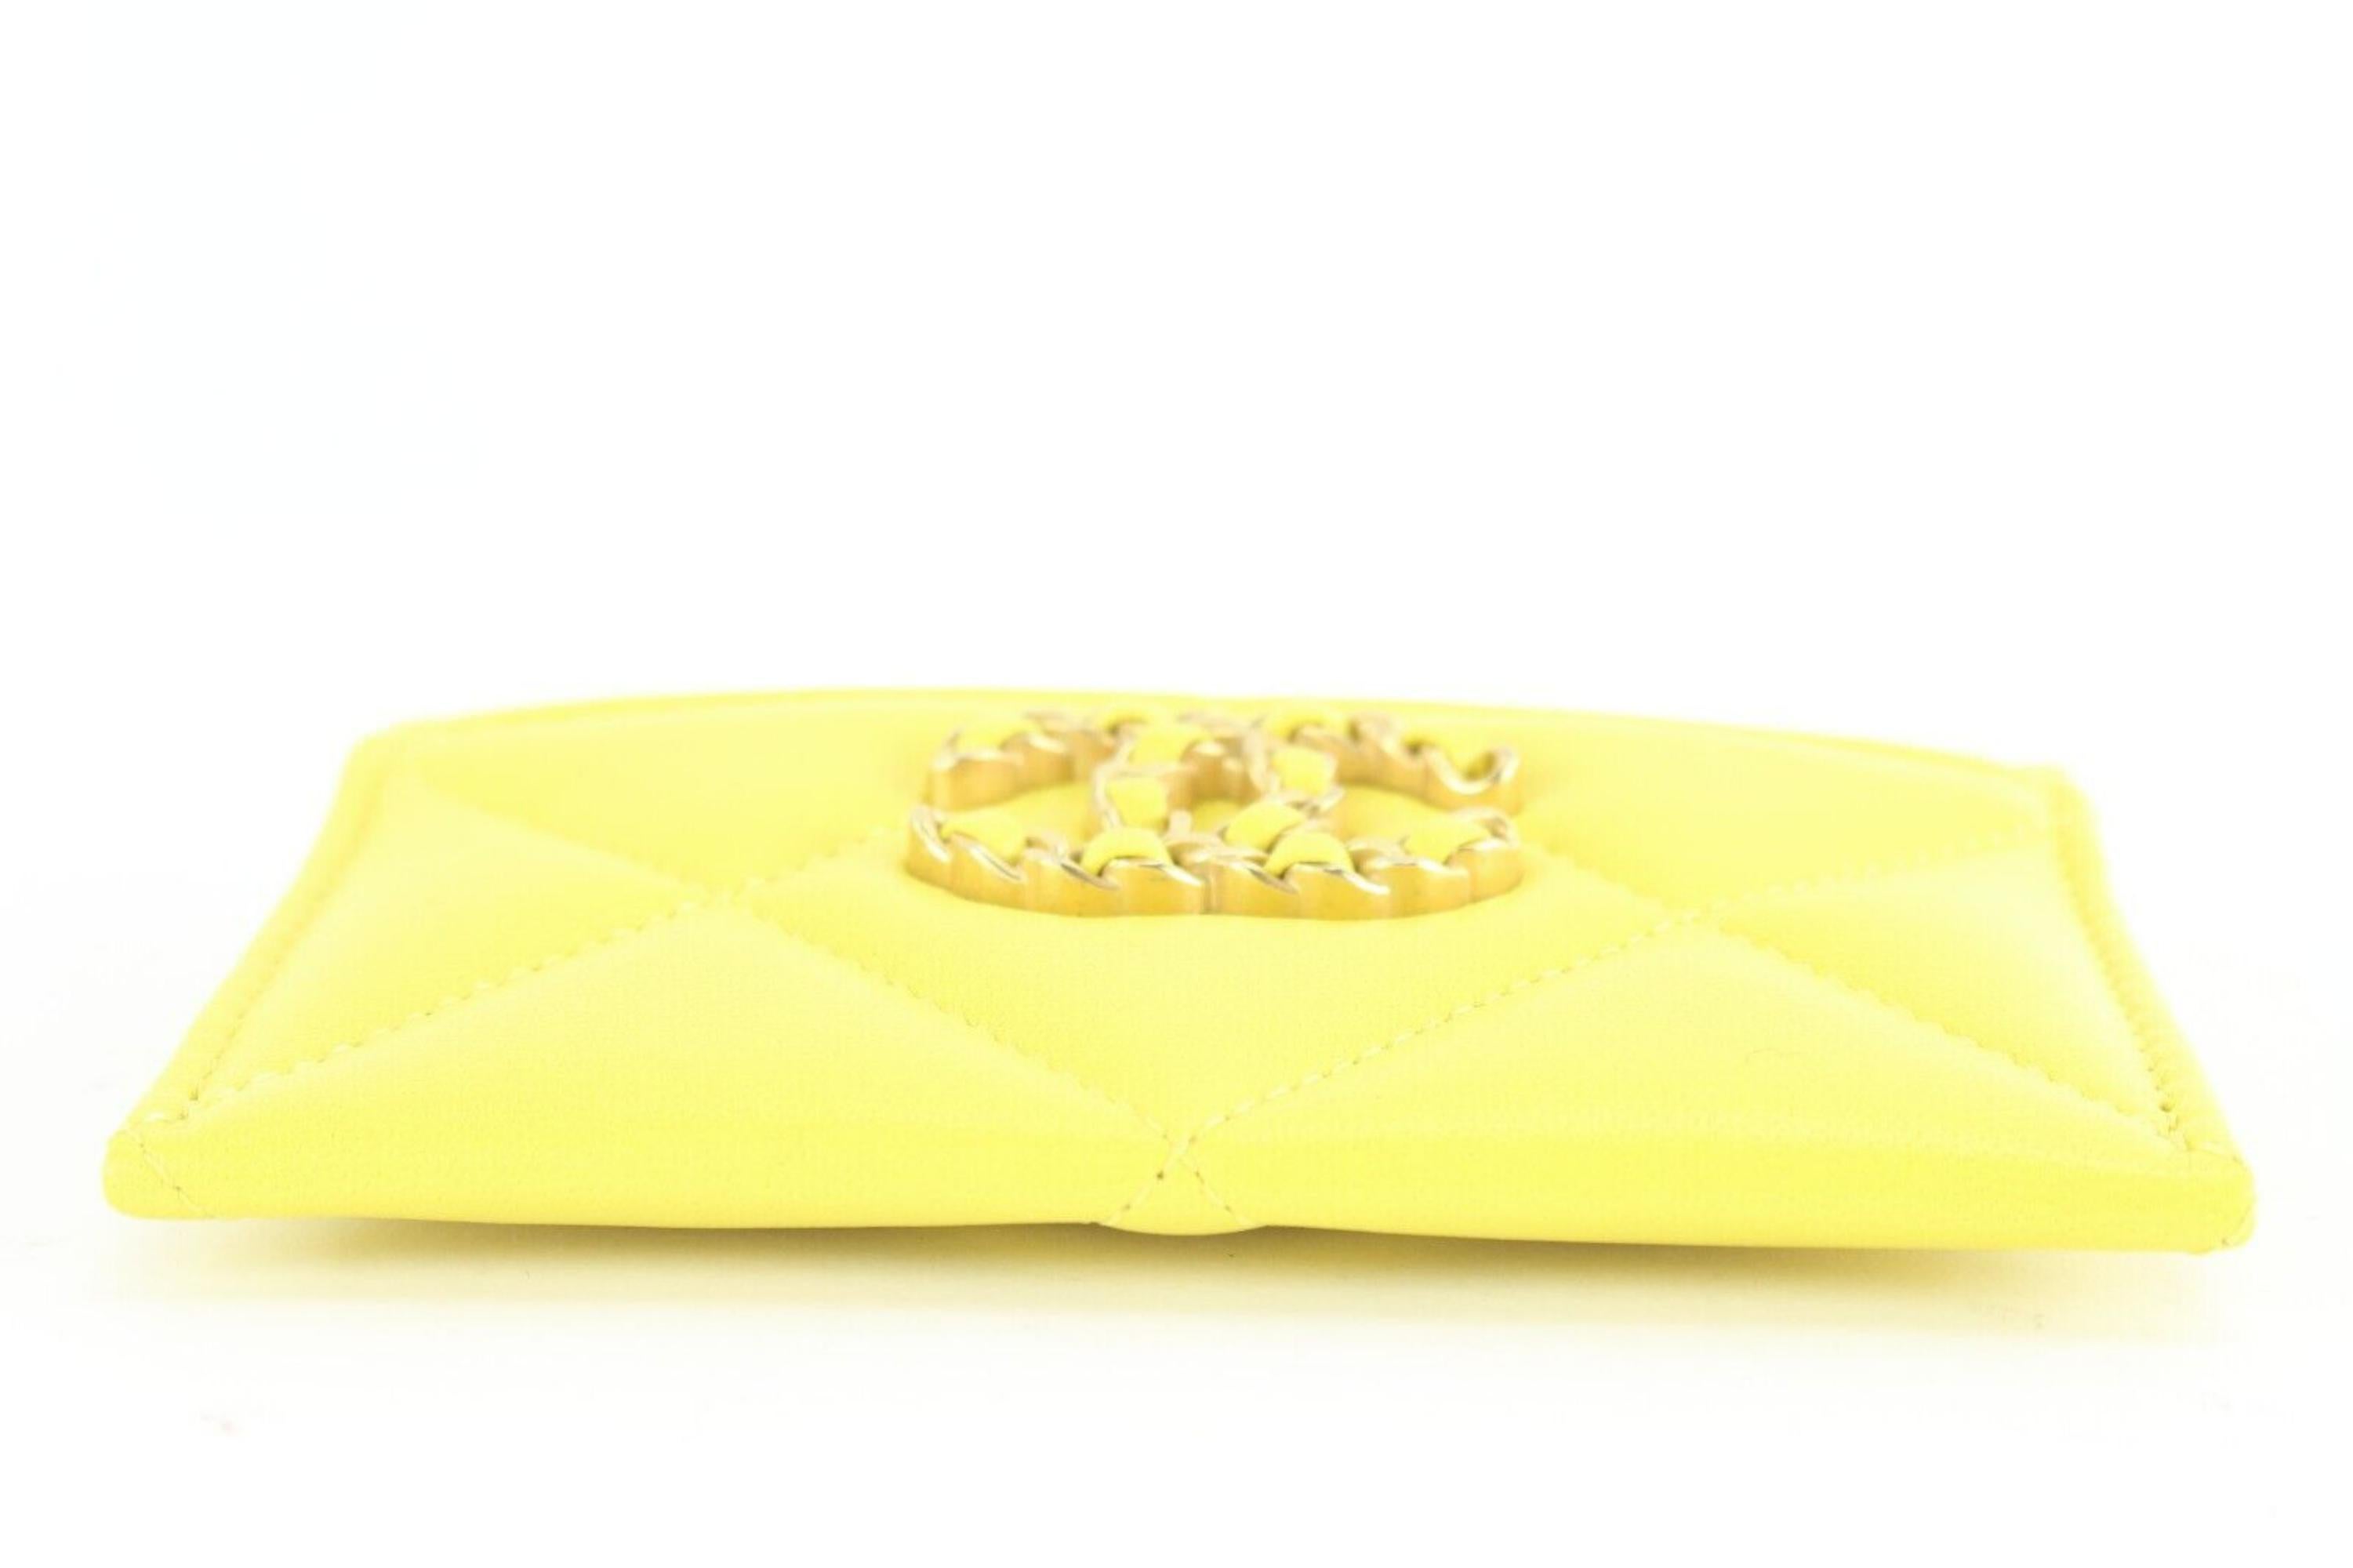 Chanel 2023 Rare Bright Yellow Leather 19 Card Holder 1CC55a 3